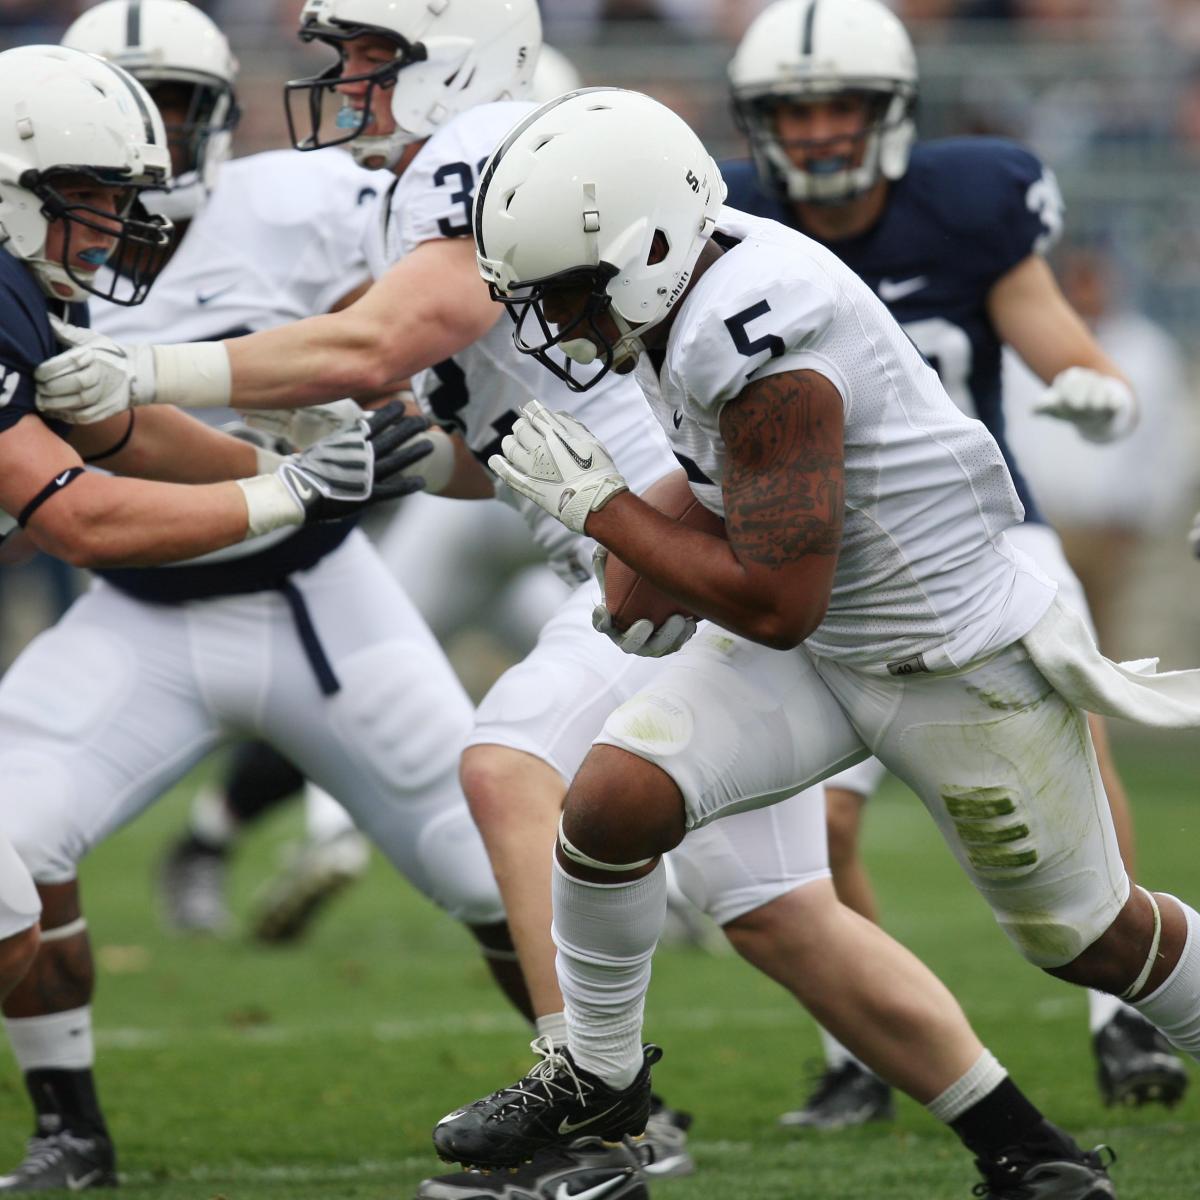 Penn State Football: Players Who Will Step Up in Place of Those Who Transferred | Bleacher ...